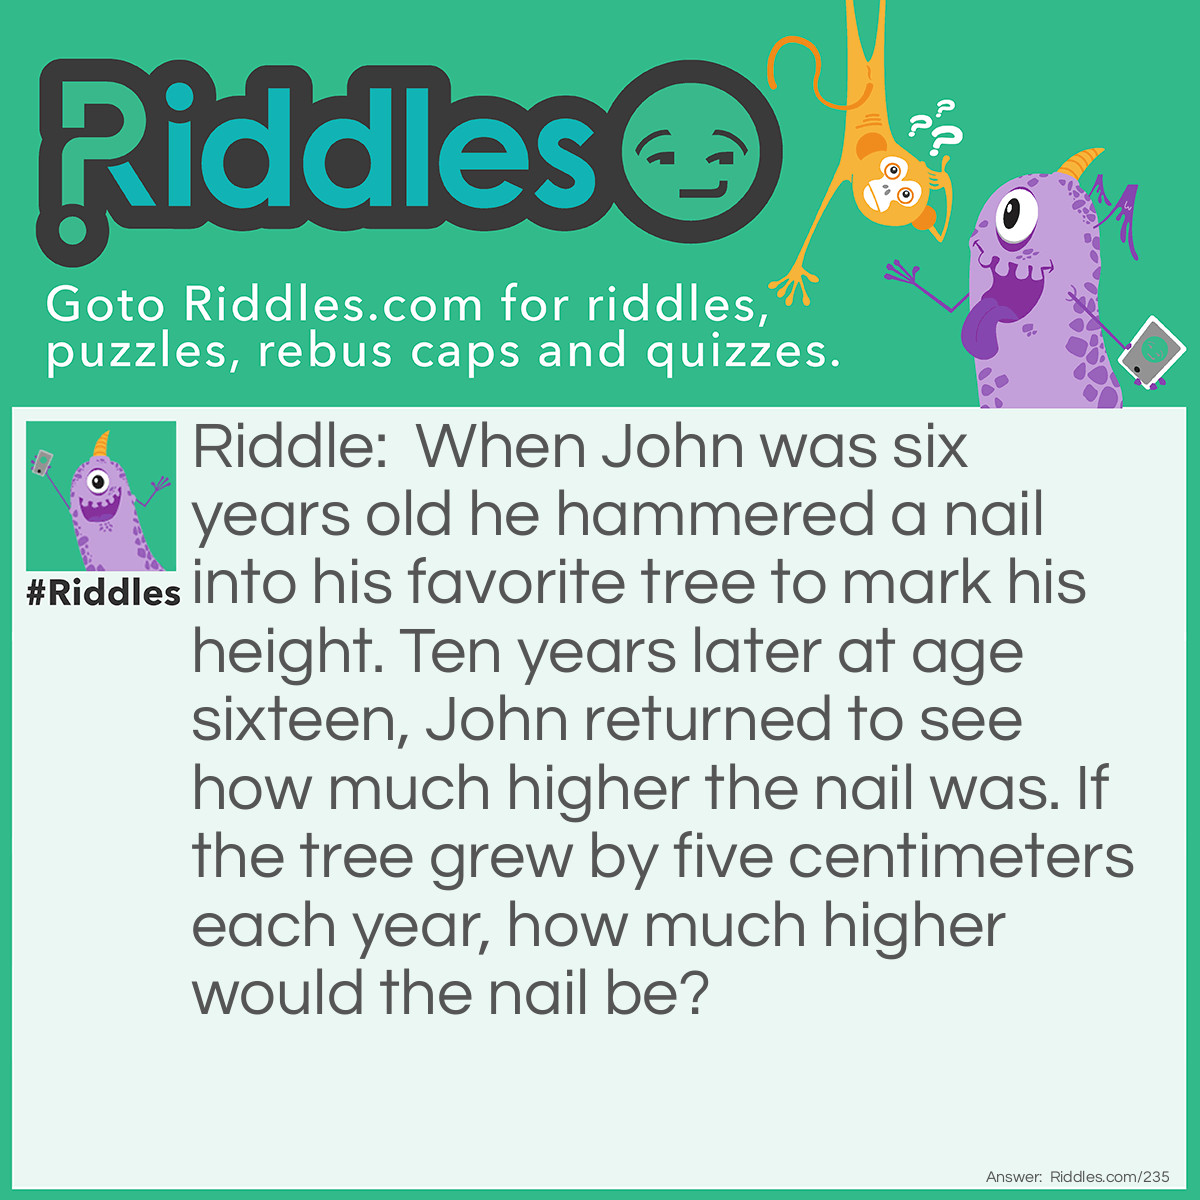 Riddle: When John was six years old he hammered a nail into his favorite tree to mark his height. Ten years later at age sixteen, John returned to see how much higher the nail was. If the tree grew by five centimeters each year, how much higher would the nail be? Answer: The nail would be at the same height since trees grow at their tops.